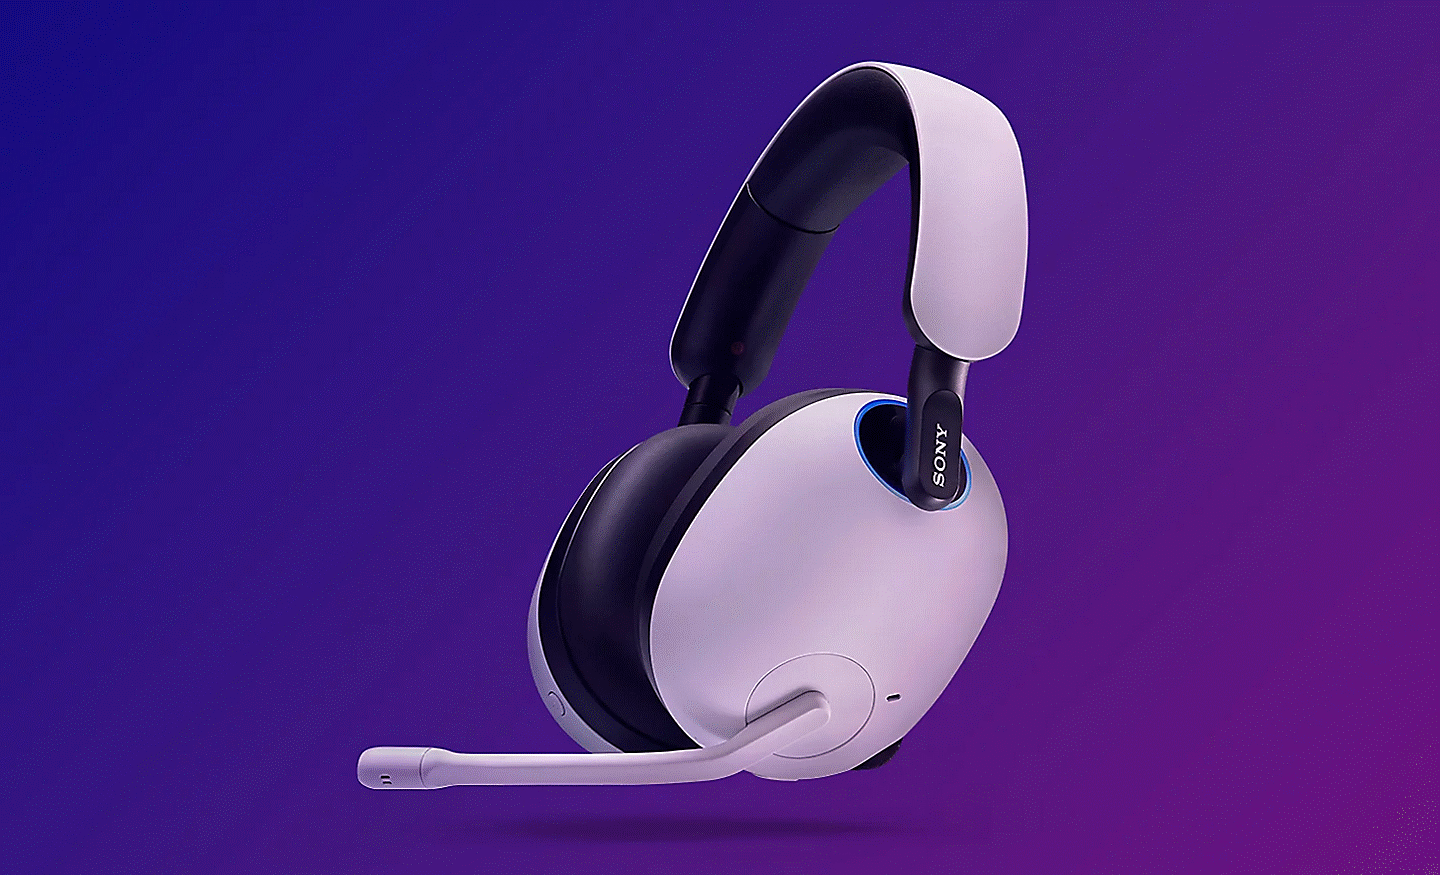 Image of a pair of white INZONE headphones on a blue and purple gradient background